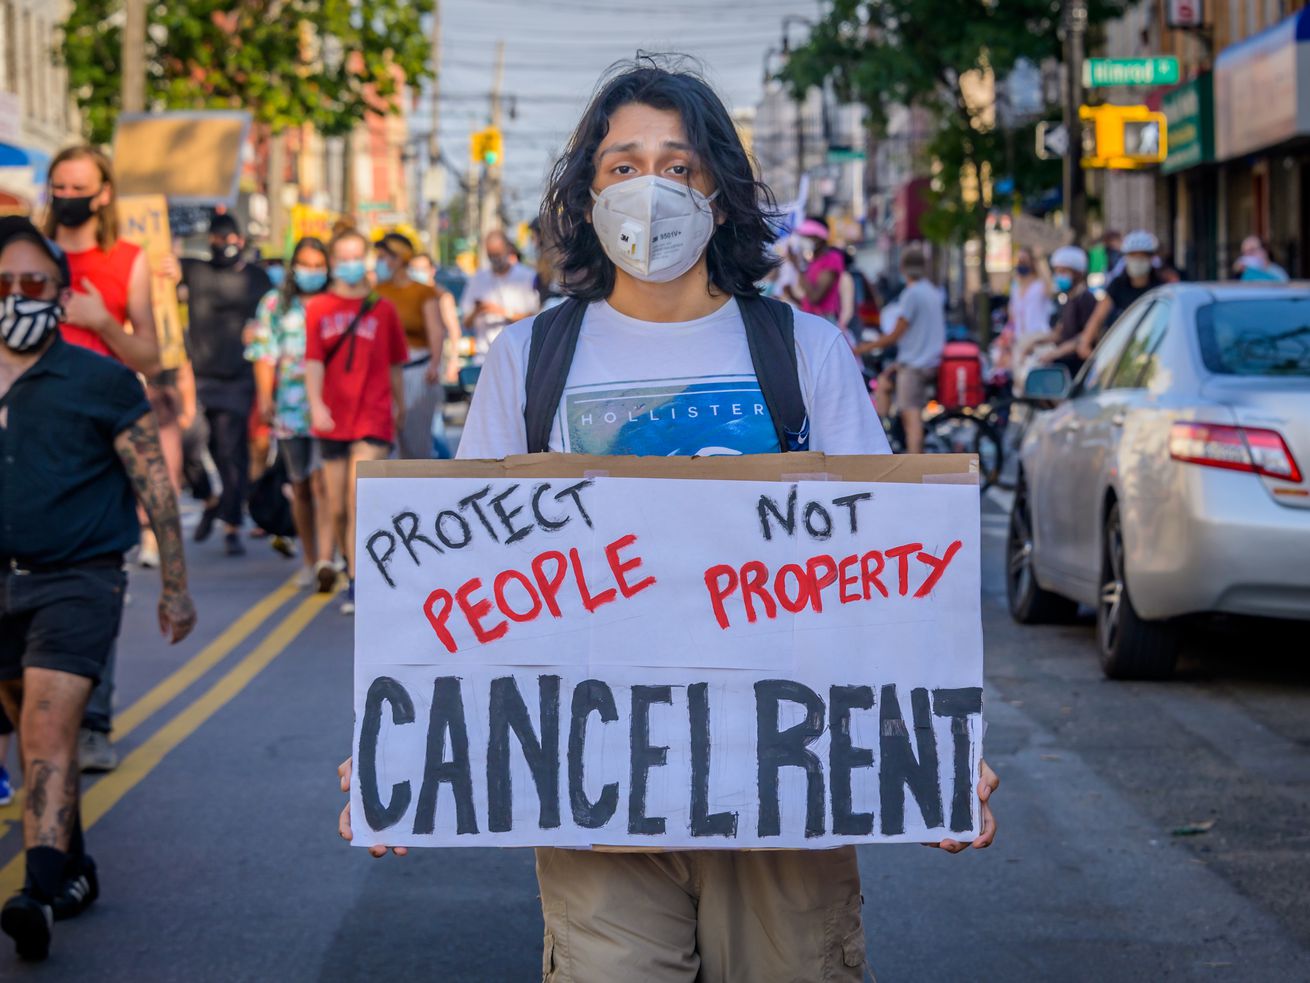 A protester walking down a street carries a sign that reads, “Protect people not property. Cancel rent.”